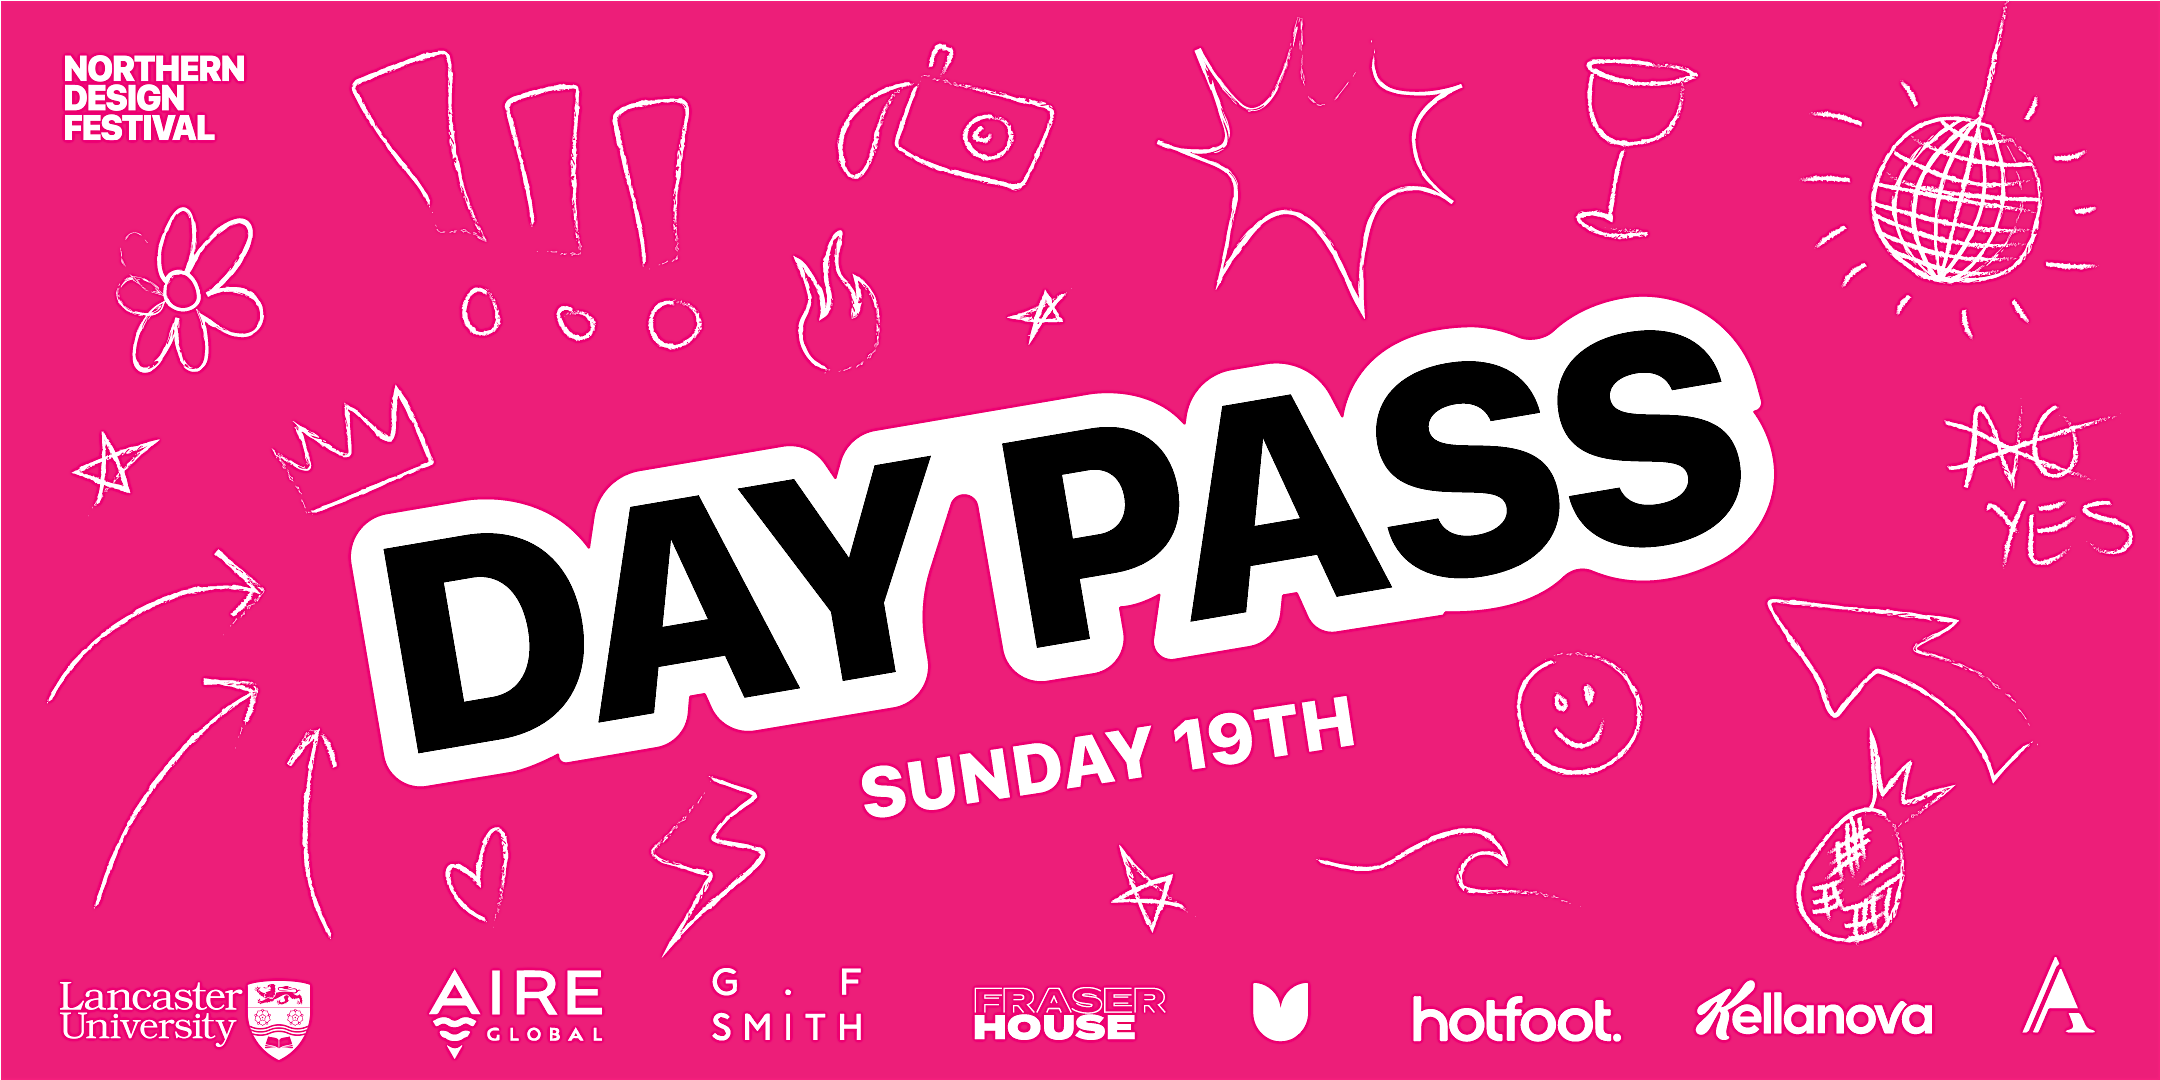 Northern Design Festival - Weekend Day Pass - Sunday